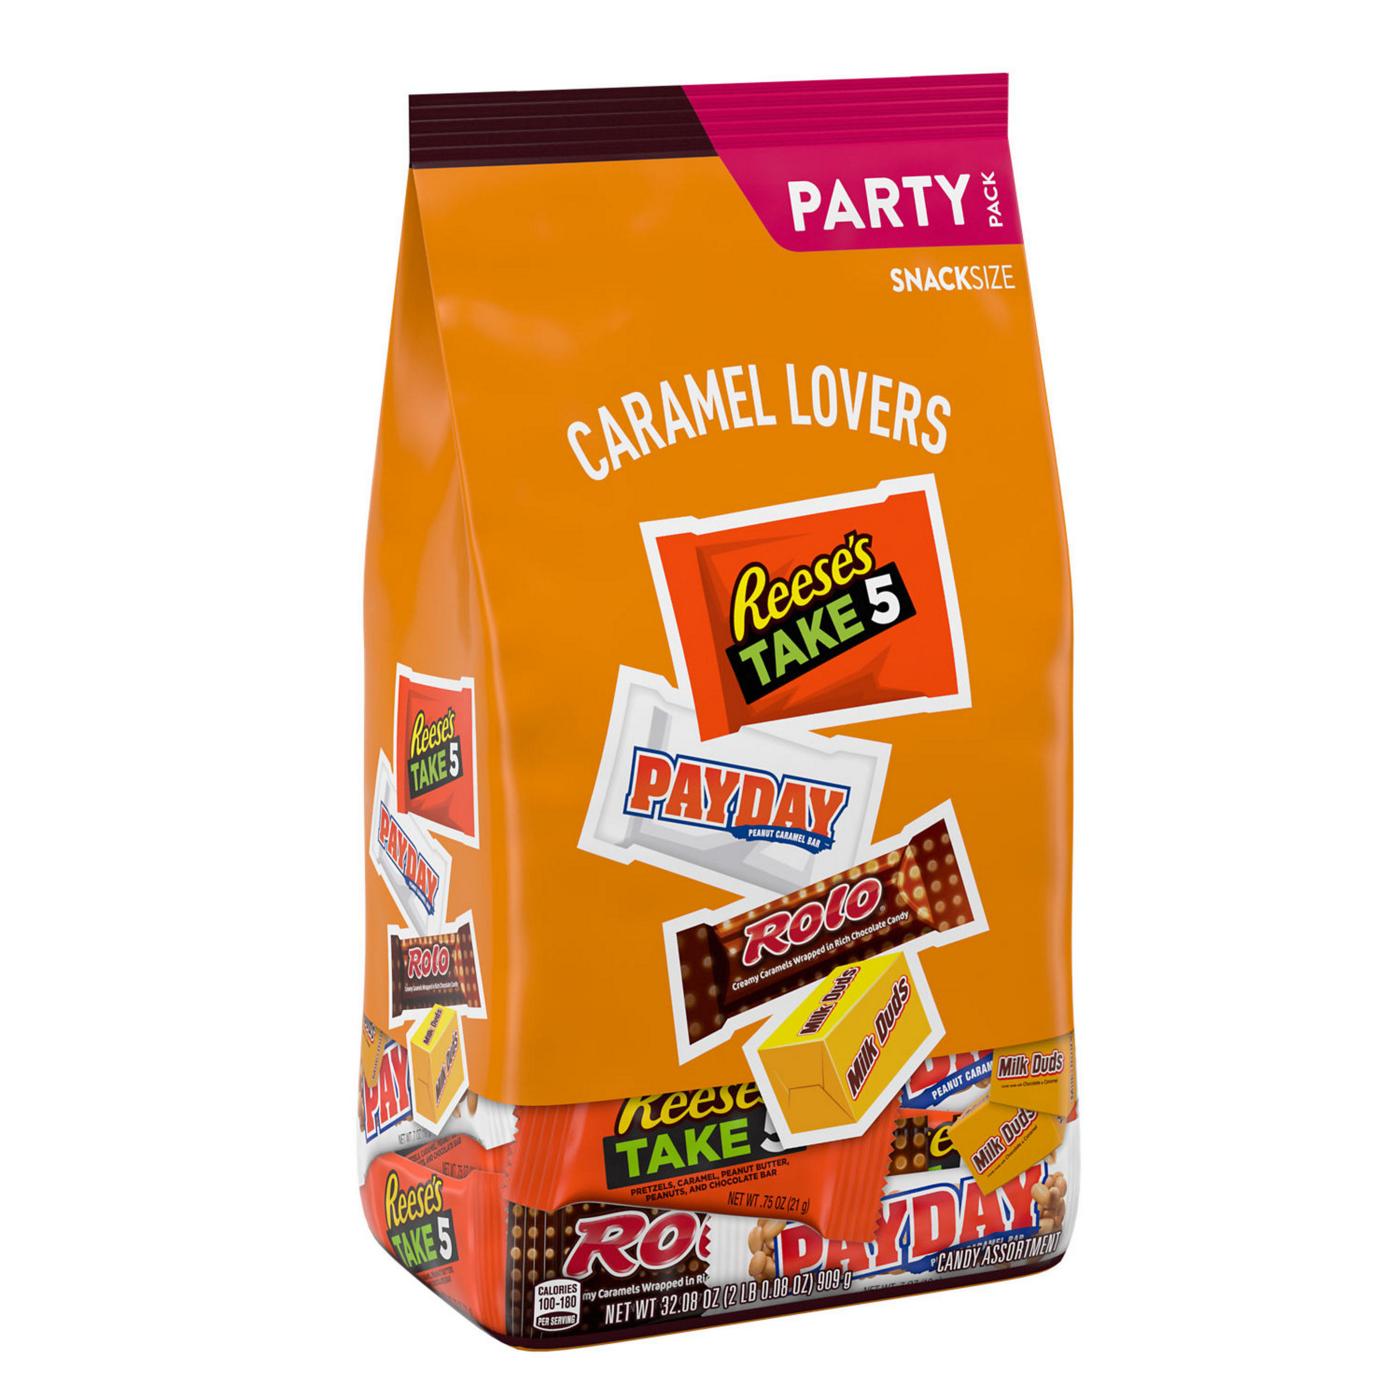 Reese's, Payday, Rolo, & Milk Duds Caramel Lovers Assorted Snack Size Candy - Party Pack; image 6 of 7